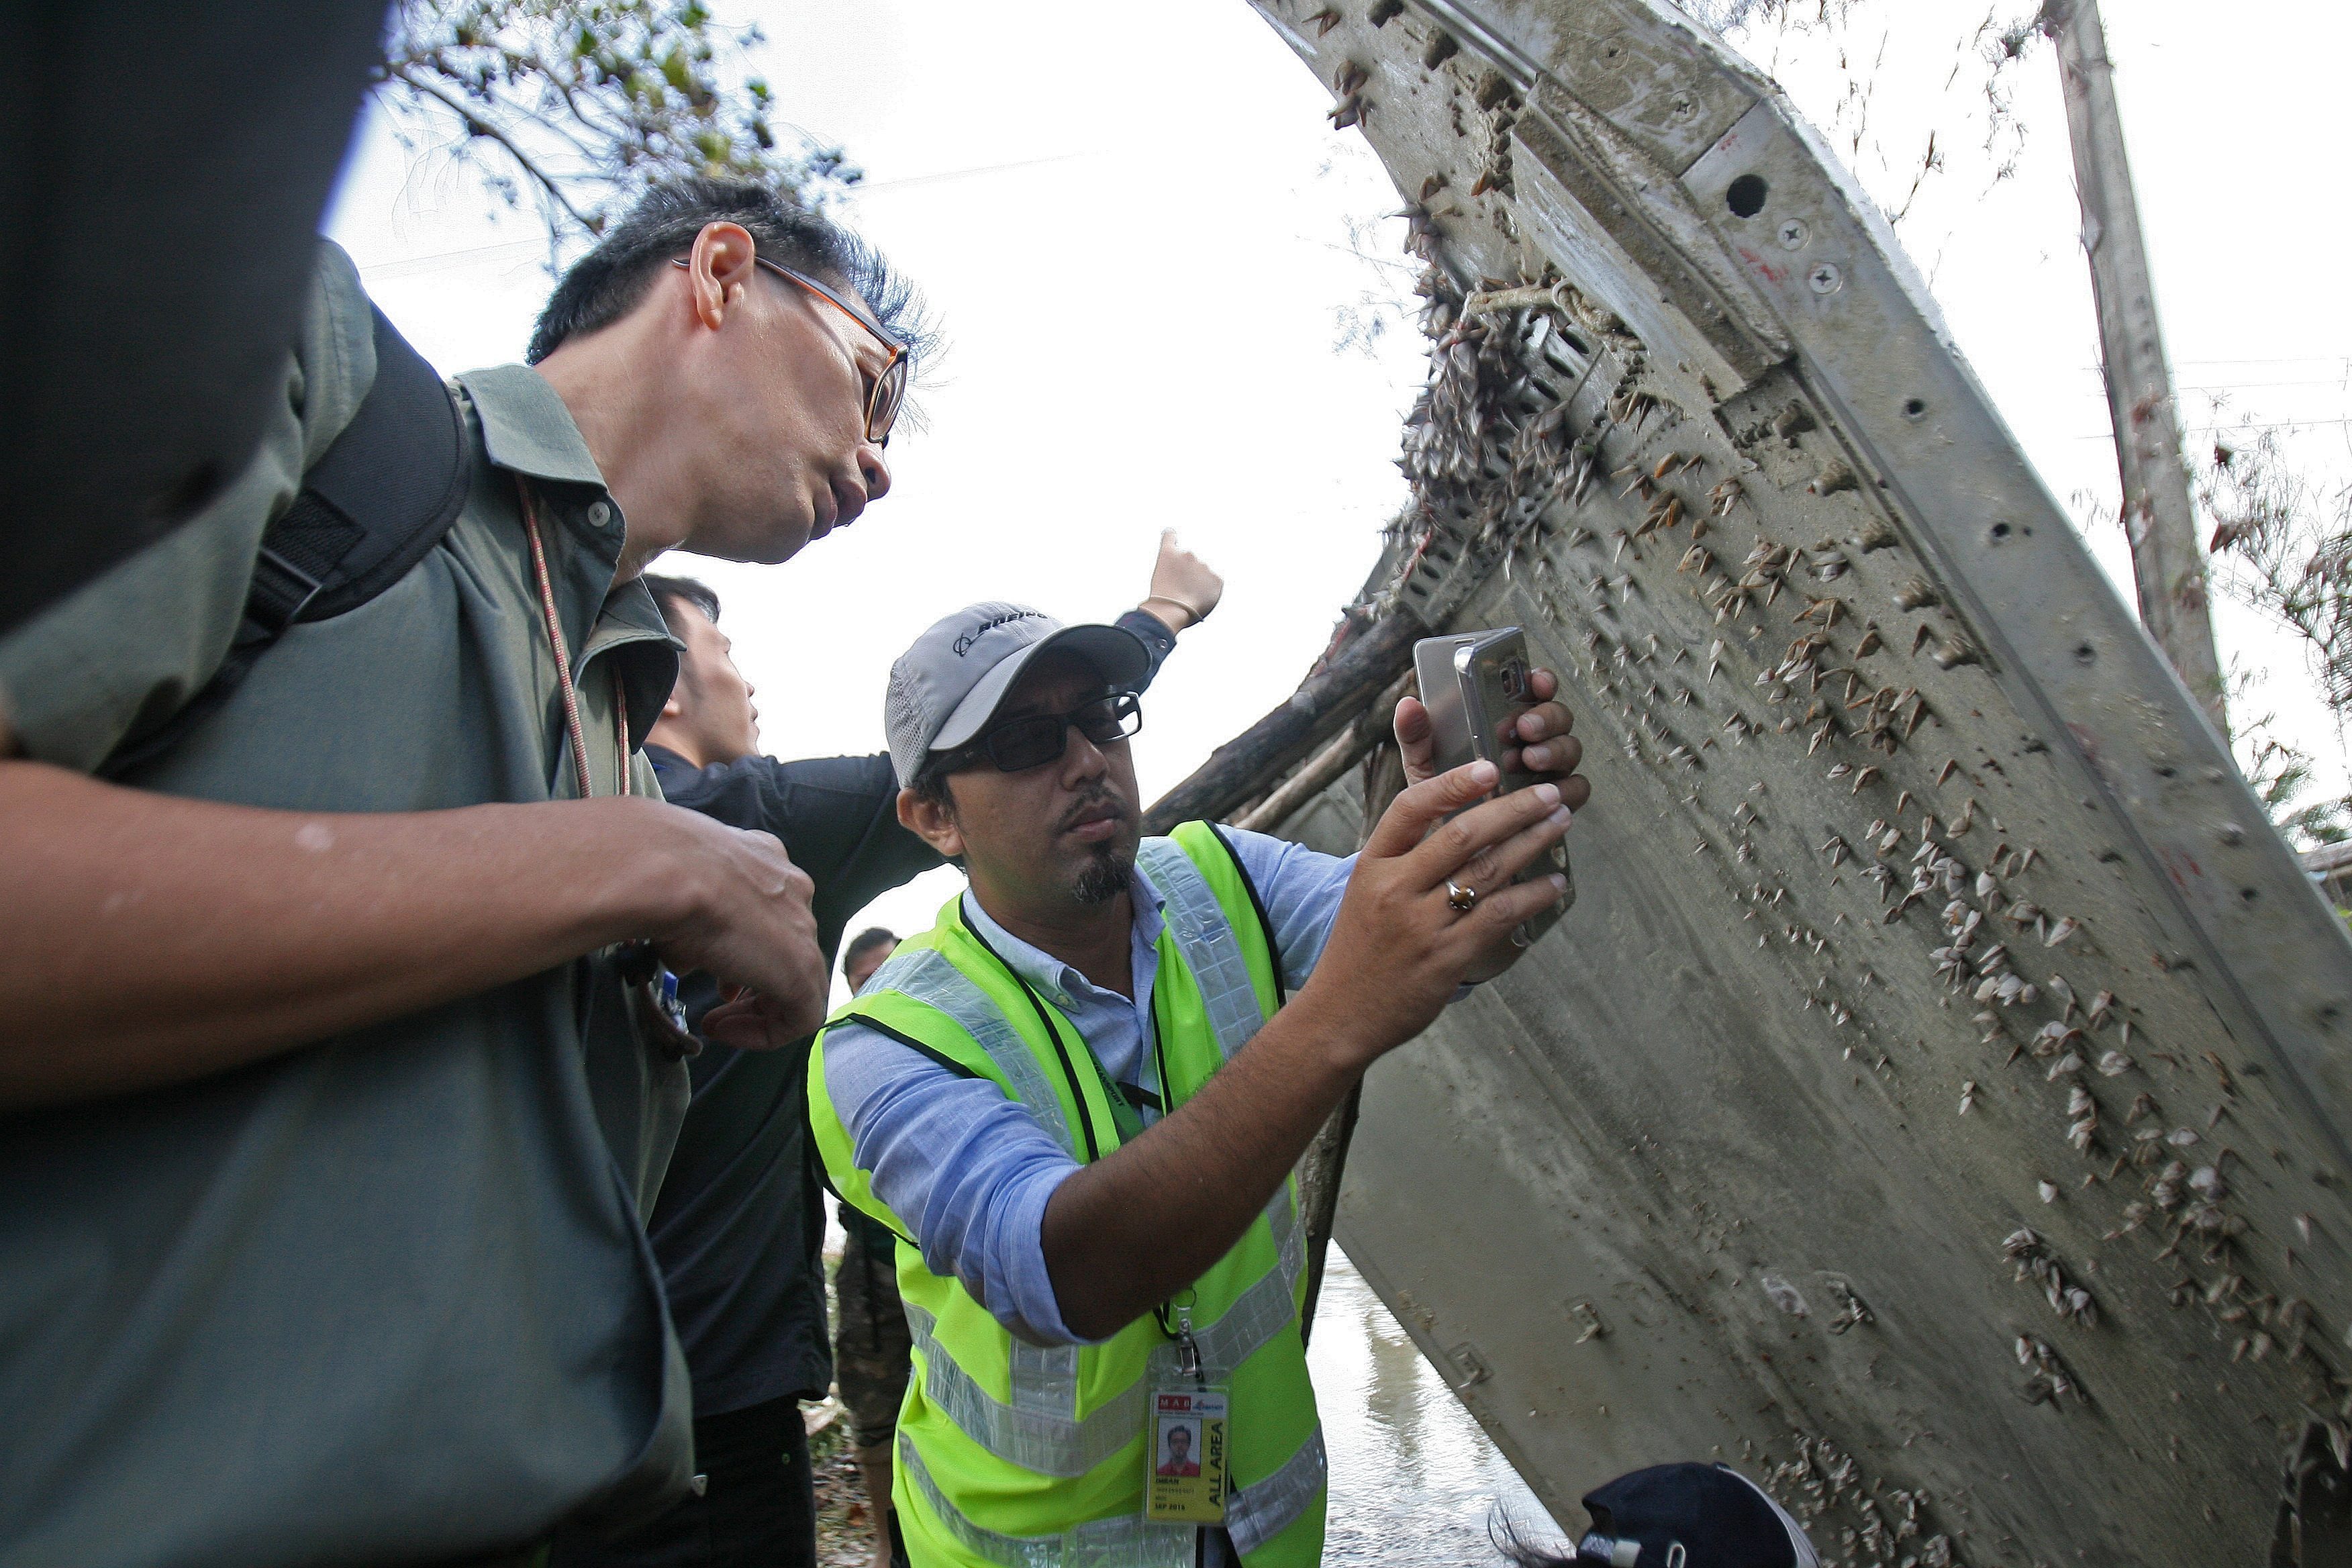 A Malaysian official (C) takes pictures of a piece of suspected aircraft debris after it was found by fishermen on January 23, at a beach in the southern province of Nakhon Si Thammarat on January 25, 2016. Thailand's air force said it would bring a piece of suspected aircraft debris - a metal panel measuring two metres (6.6 feet) by three metres - found on the southeast coast to Bangkok, amid media speculation it may belong to missing Malaysia Airlines Flight MH370. AFP PHOTO / TUWAEDANIYA MERINGING / AFP PHOTO / Tuwaedaniya MERINGING